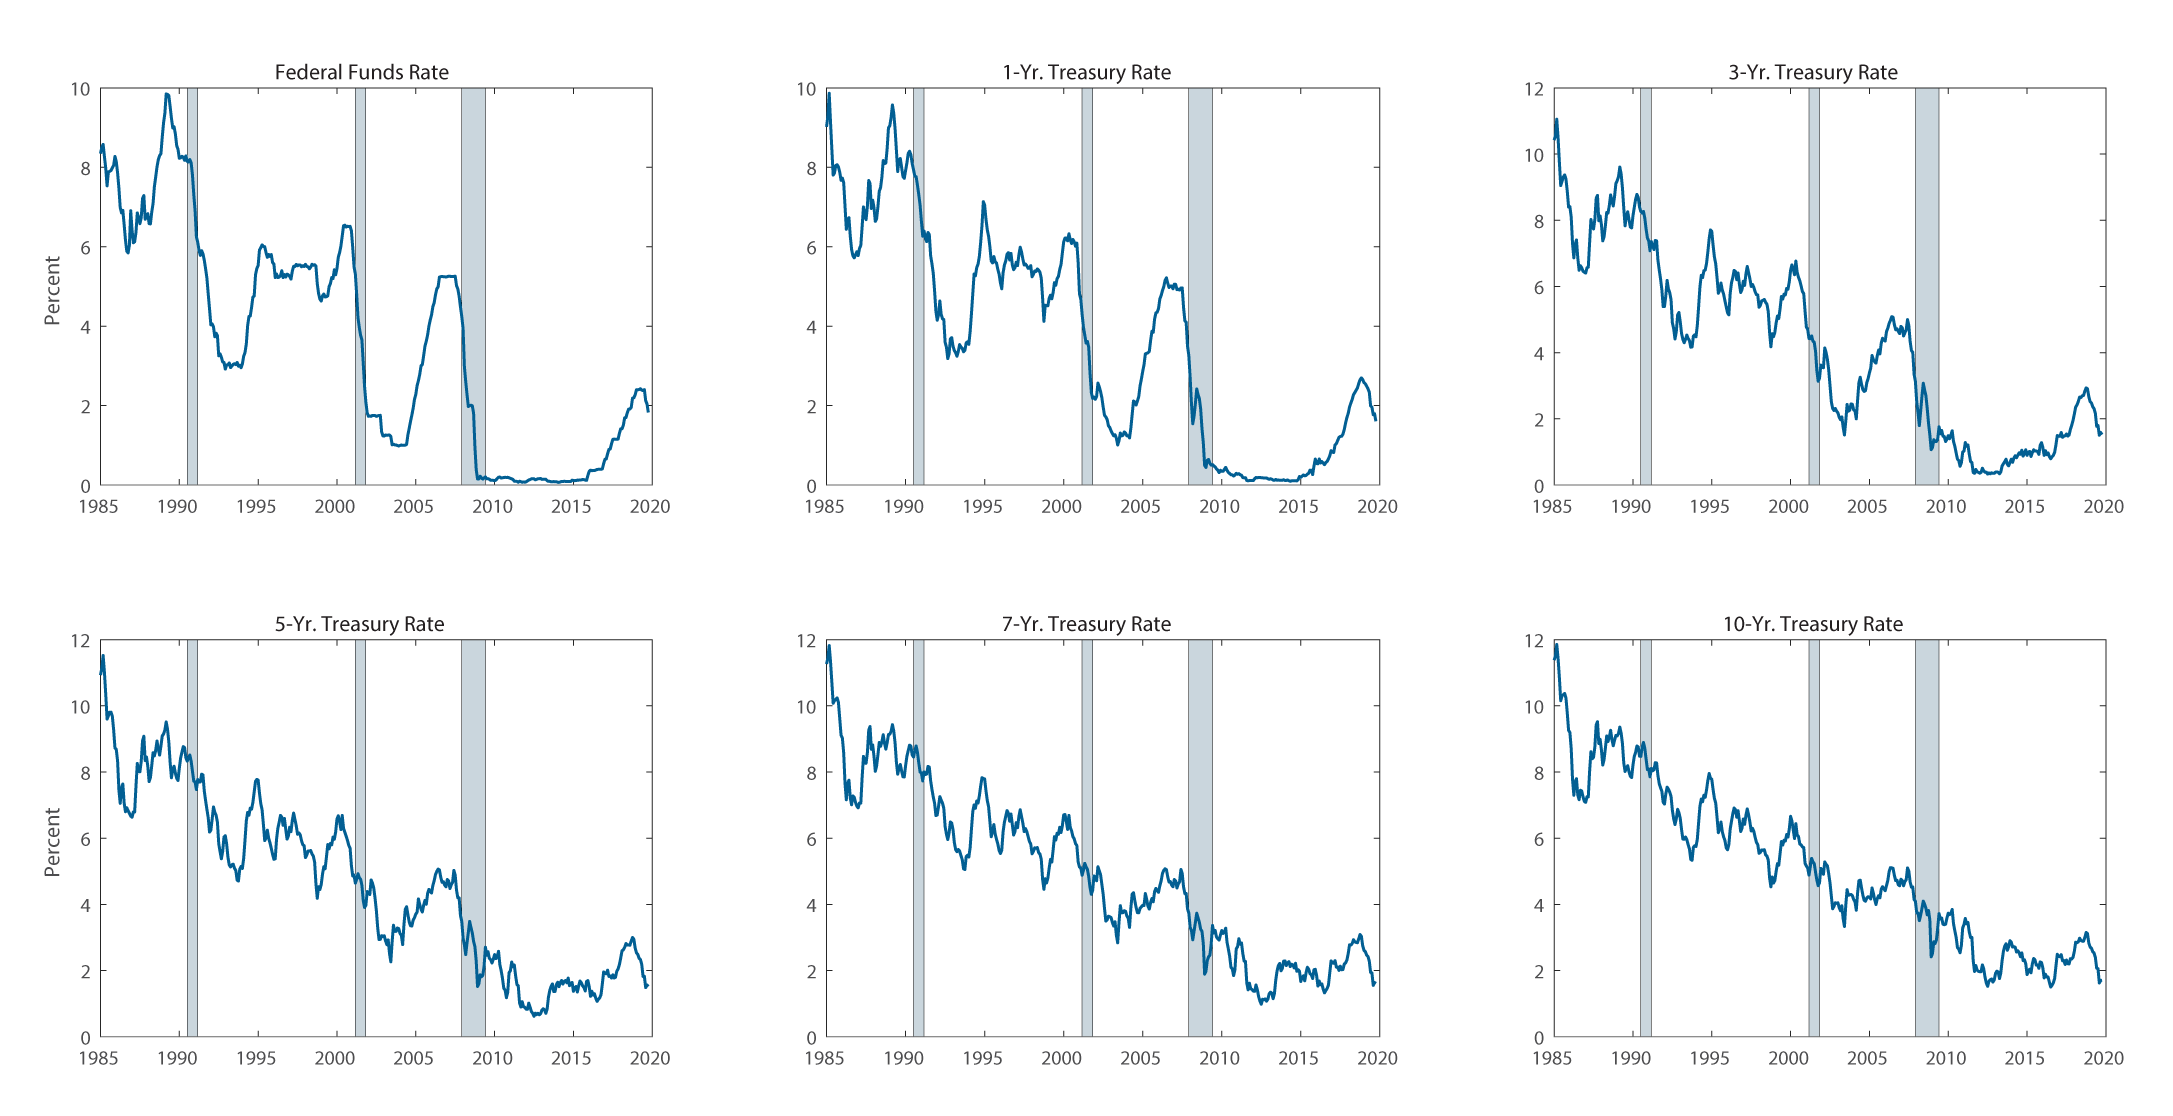 Figure 1. Nominal Interest Rates at Various Maturities in the United States. See accessible link for data description.